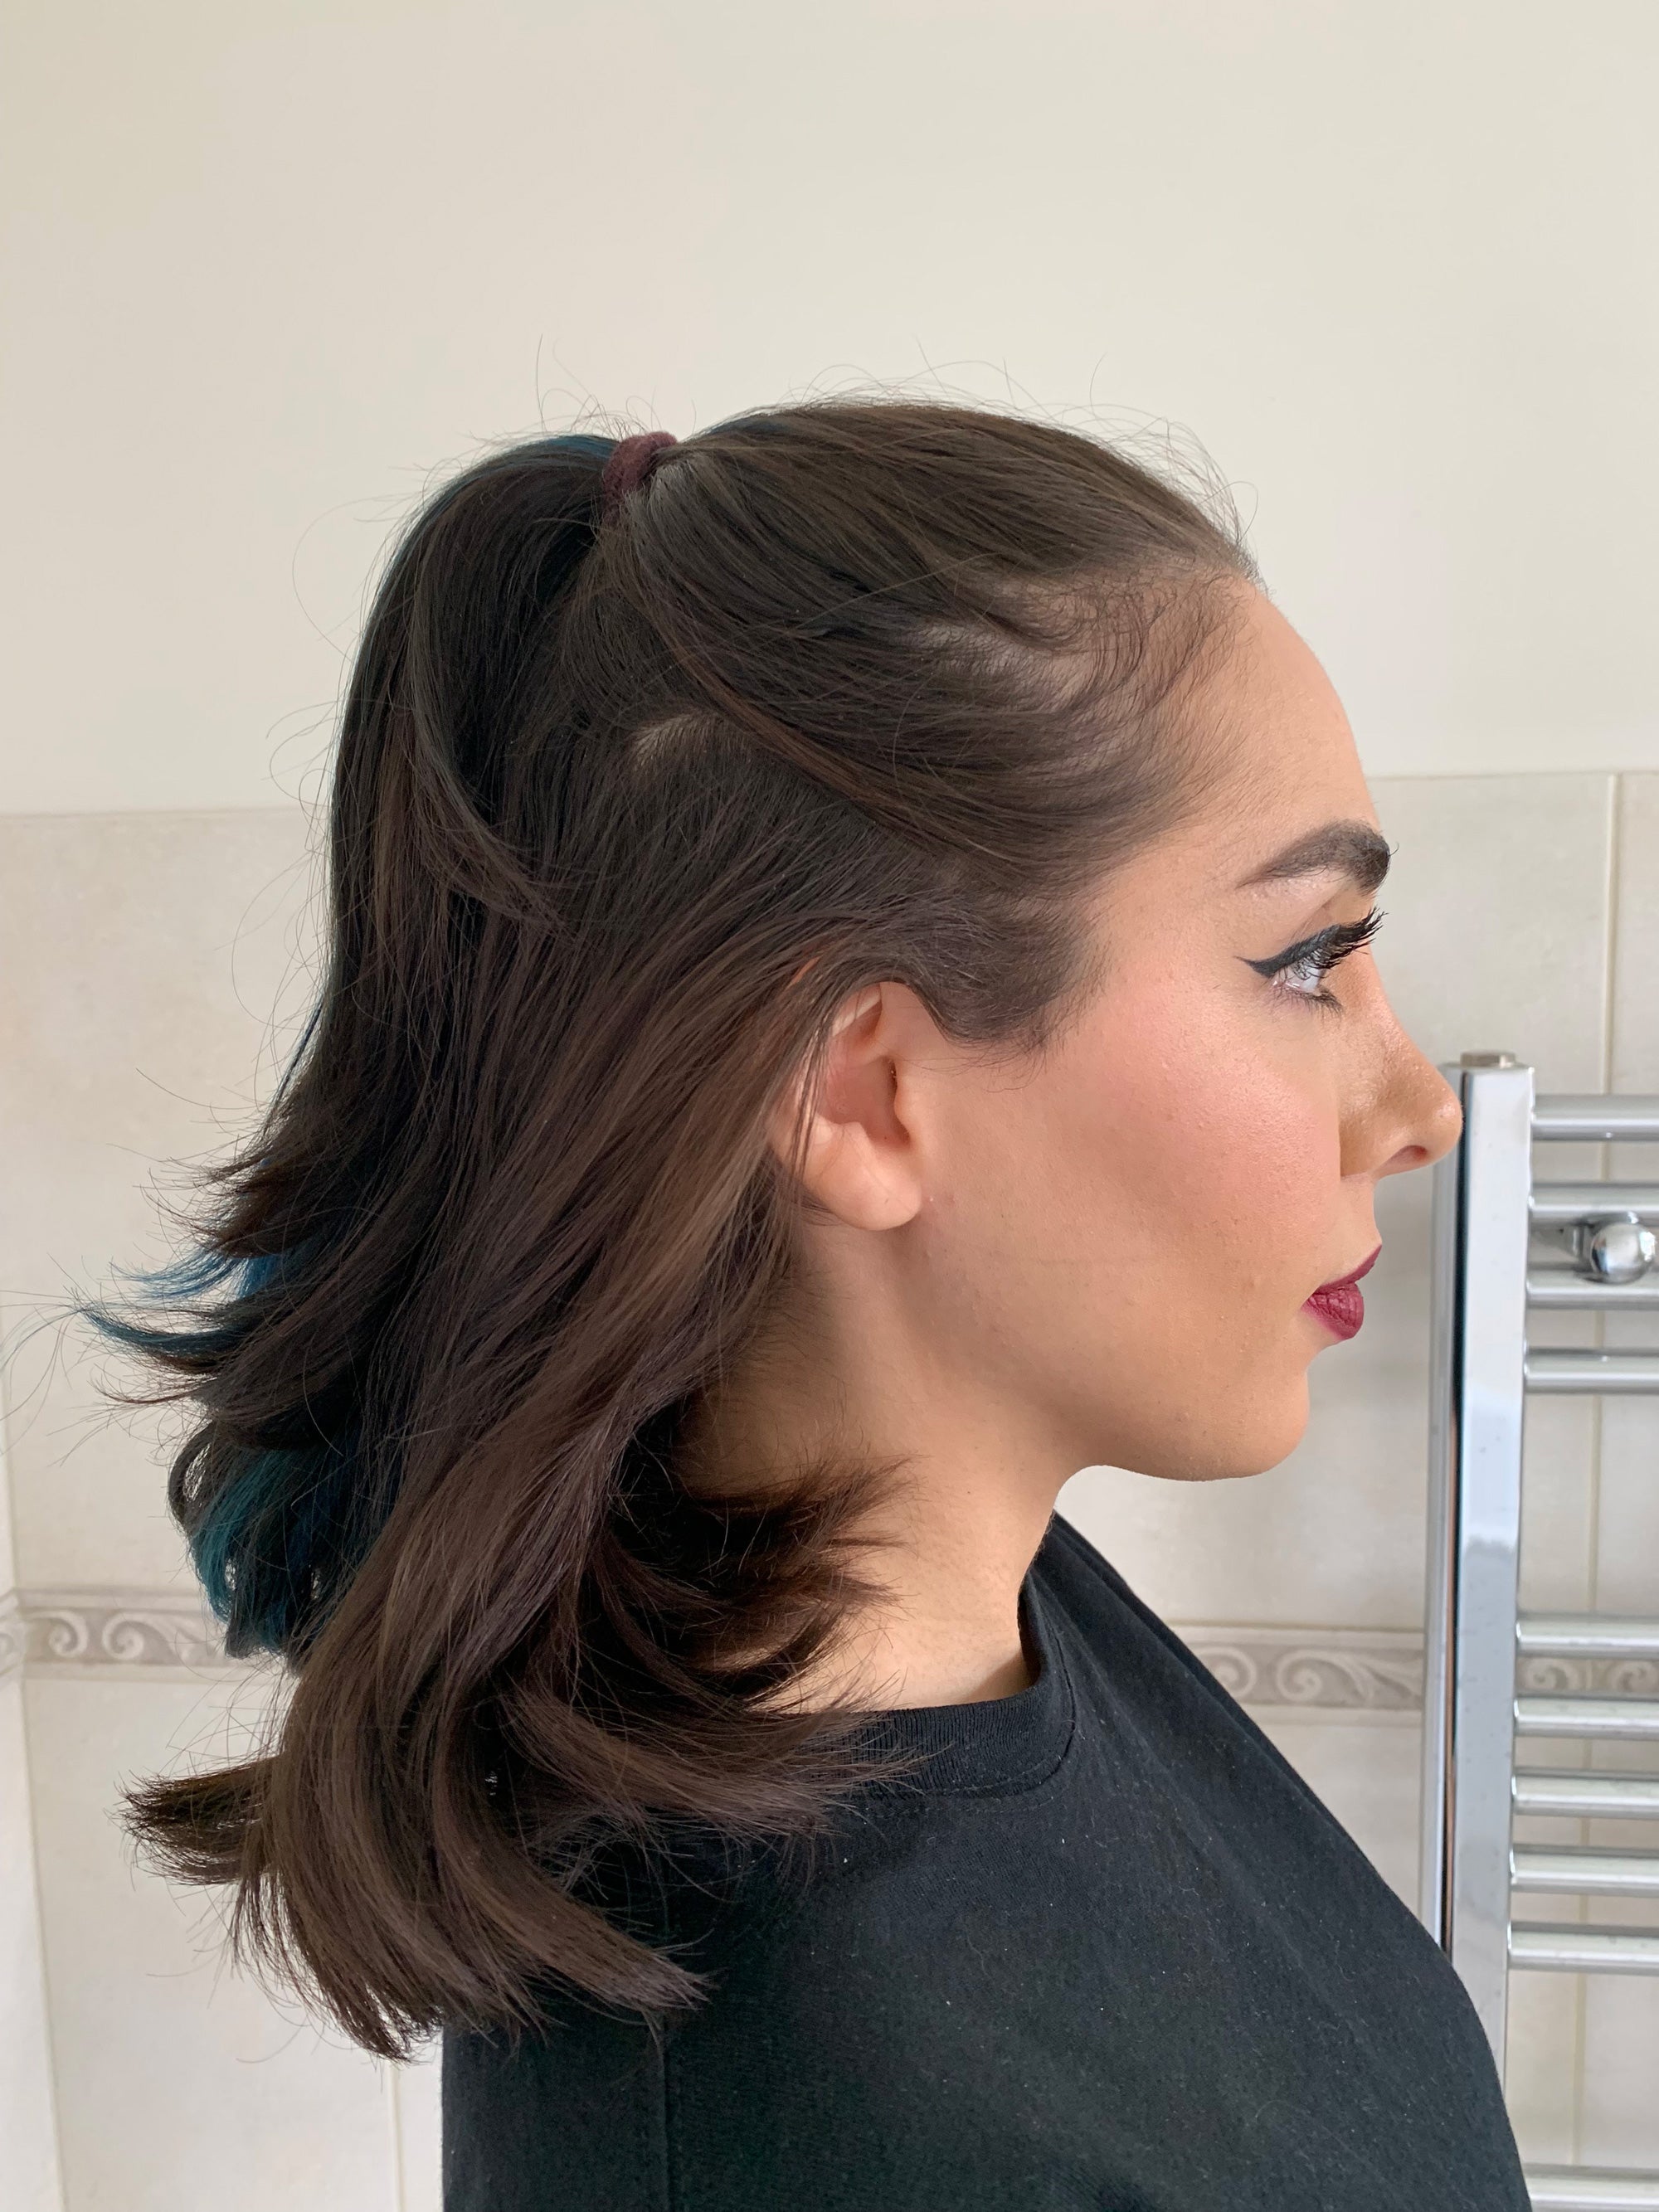 TikTok Double Ponytail Hack Tried & Tested